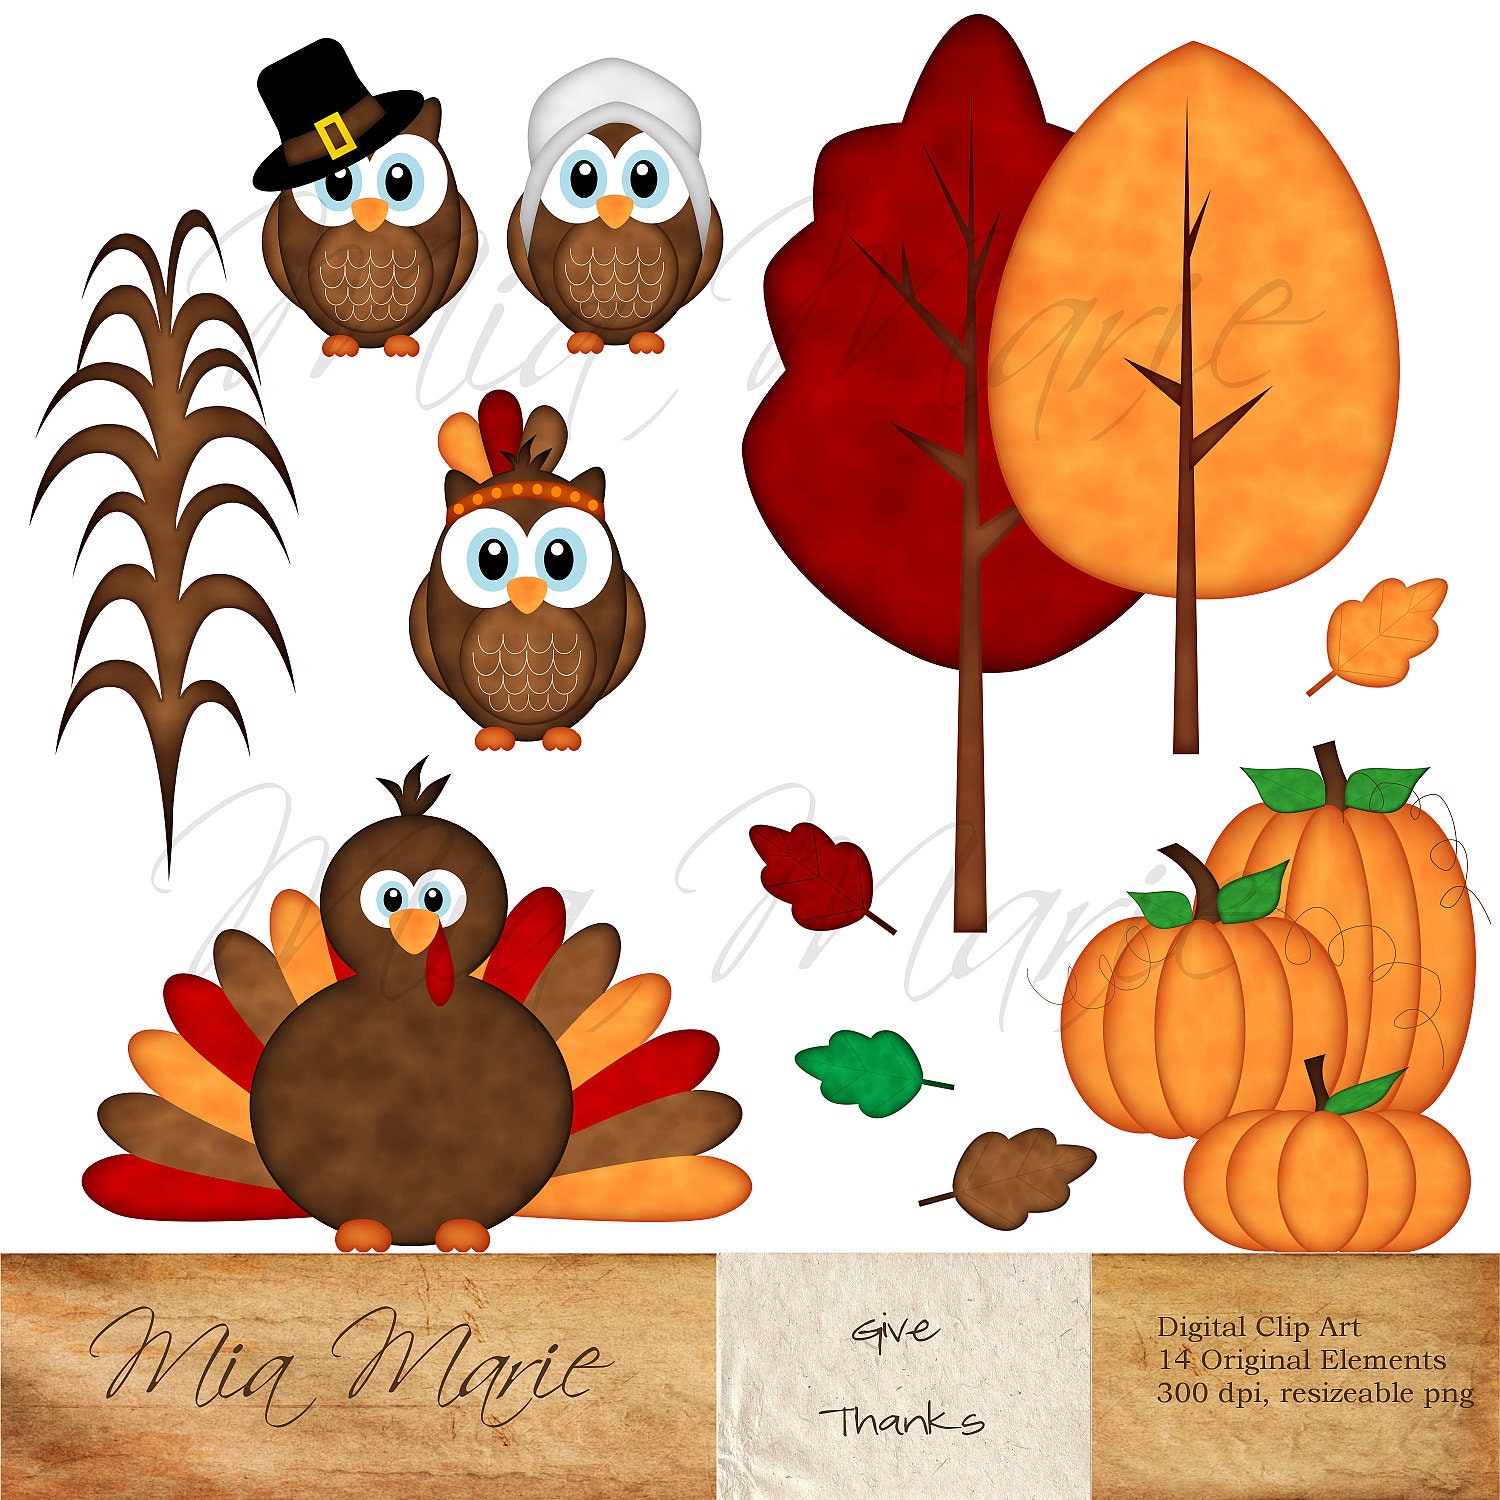 clipart of thanksgiving - photo #50